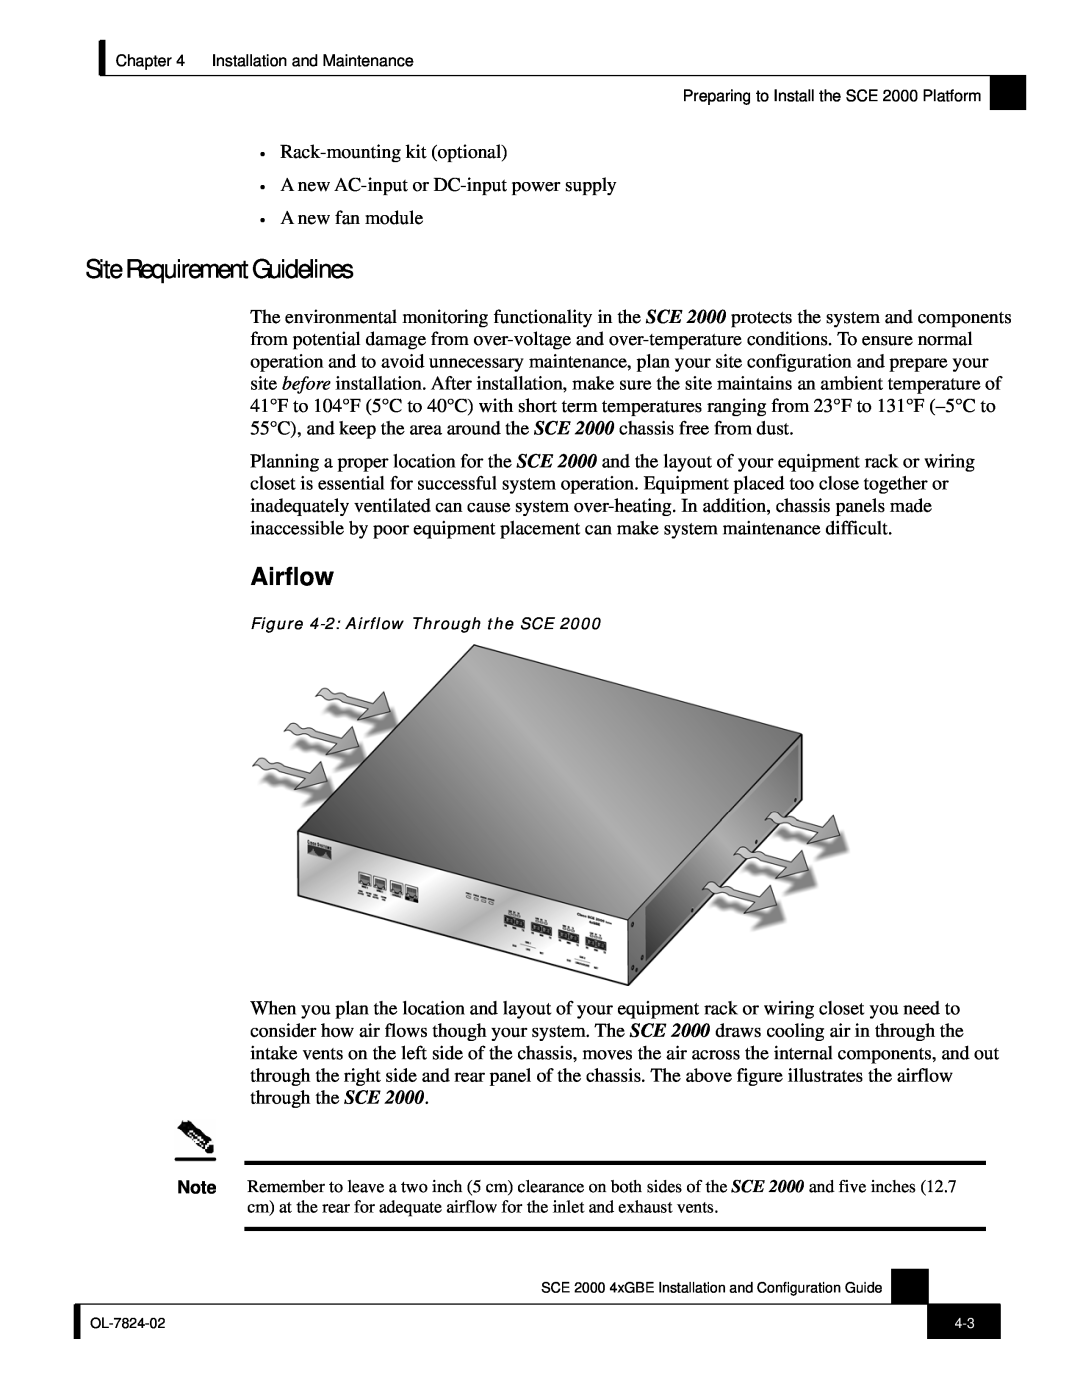 Cisco Systems SCE 2000 4xGBE manual Site Requirement Guidelines, Airflow 